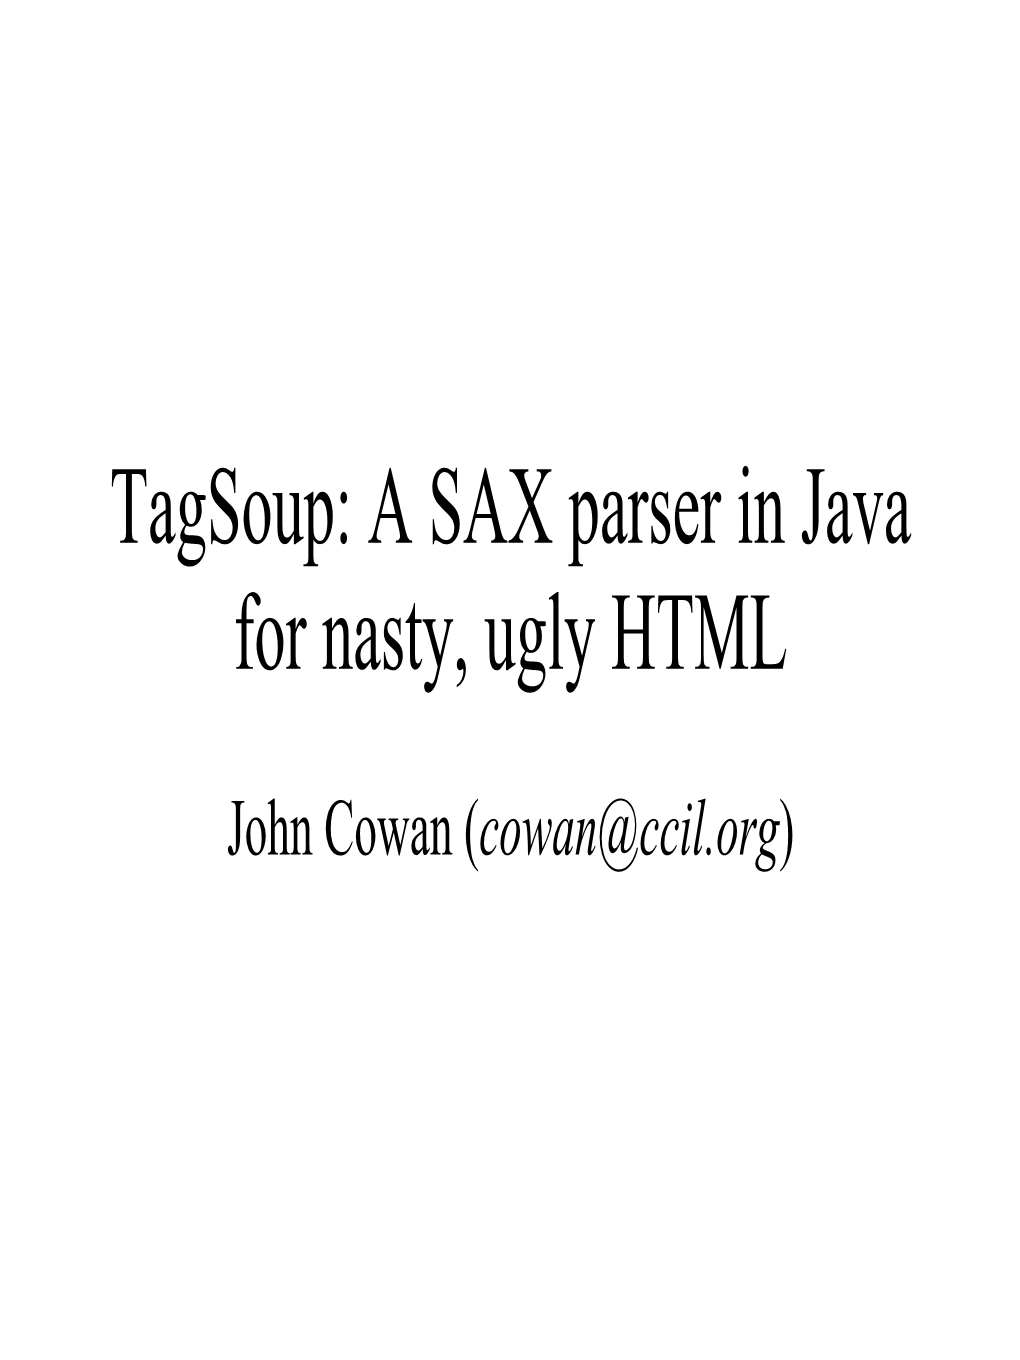 Tagsoup: a SAX Parser in Java for Nasty, Ugly HTML